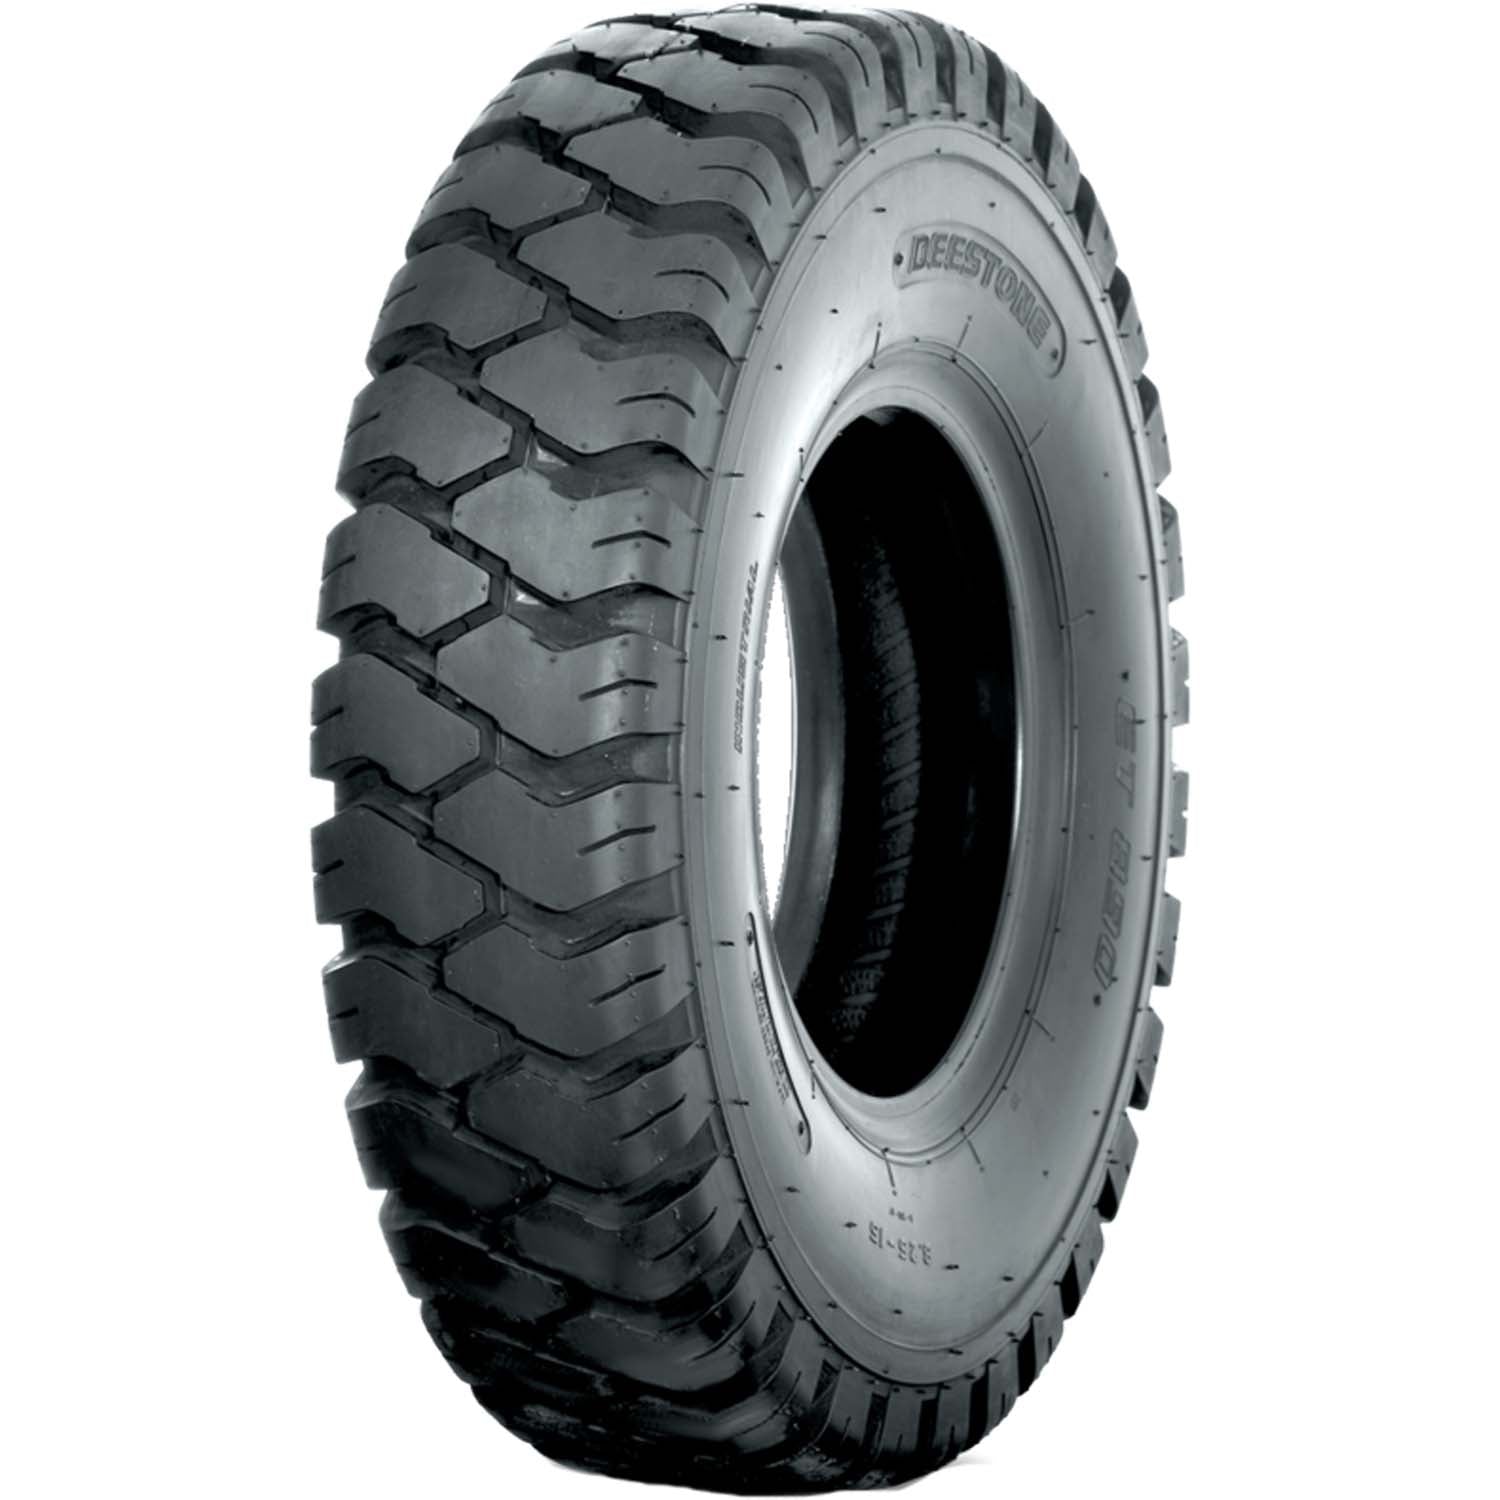 Deestone D301 Forklift Tire With Flap 12ply 7.00-15 (30x8-15)